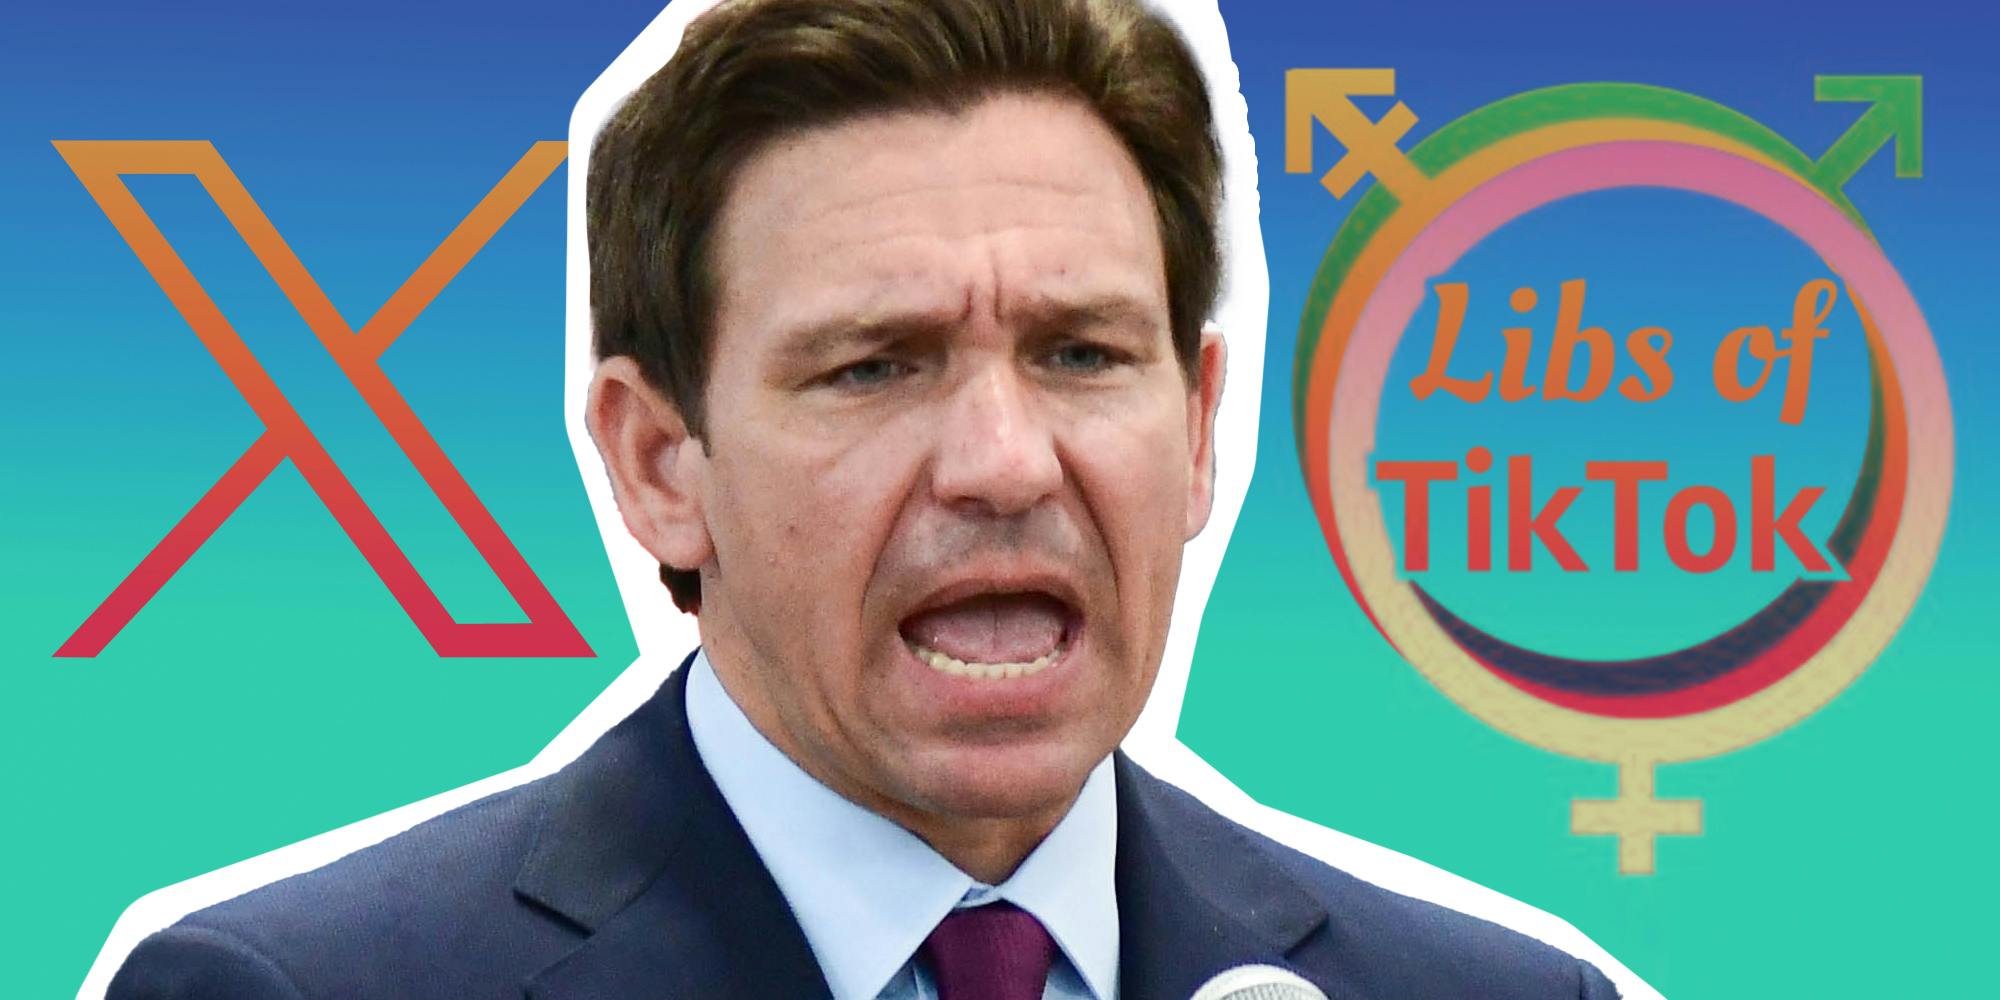 ‘Clicks are more important than truth’: DeSantis’ team is going after Libs of TikTok again